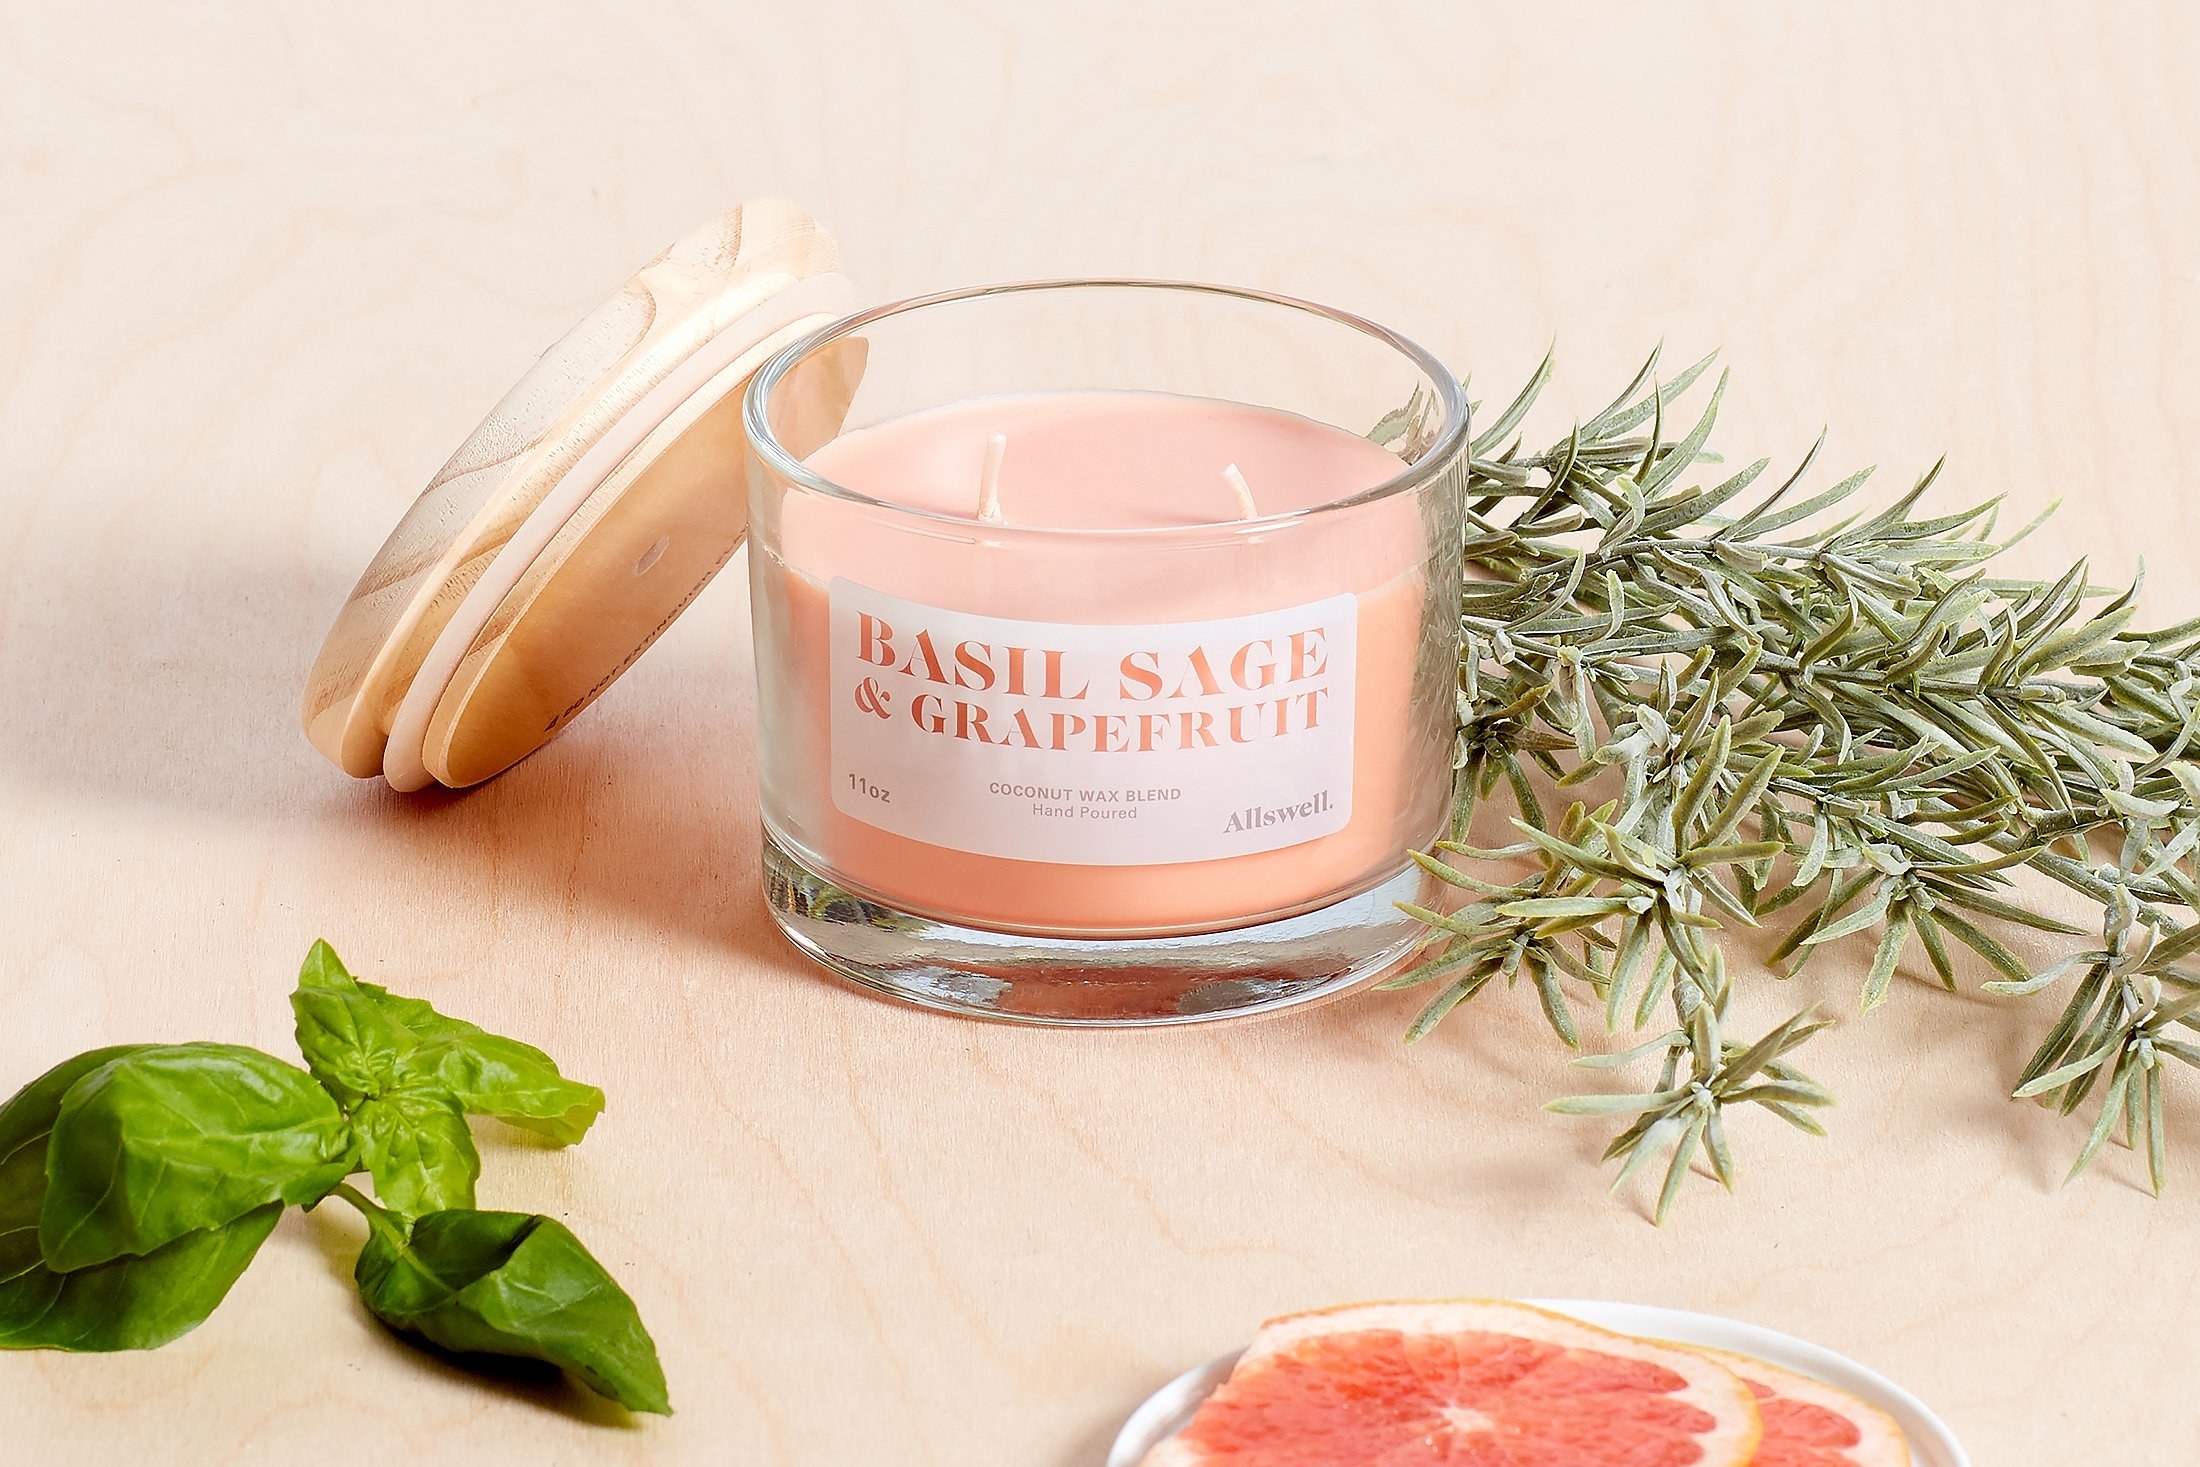 The double wick candle in basil, sage, and grapefruit scent